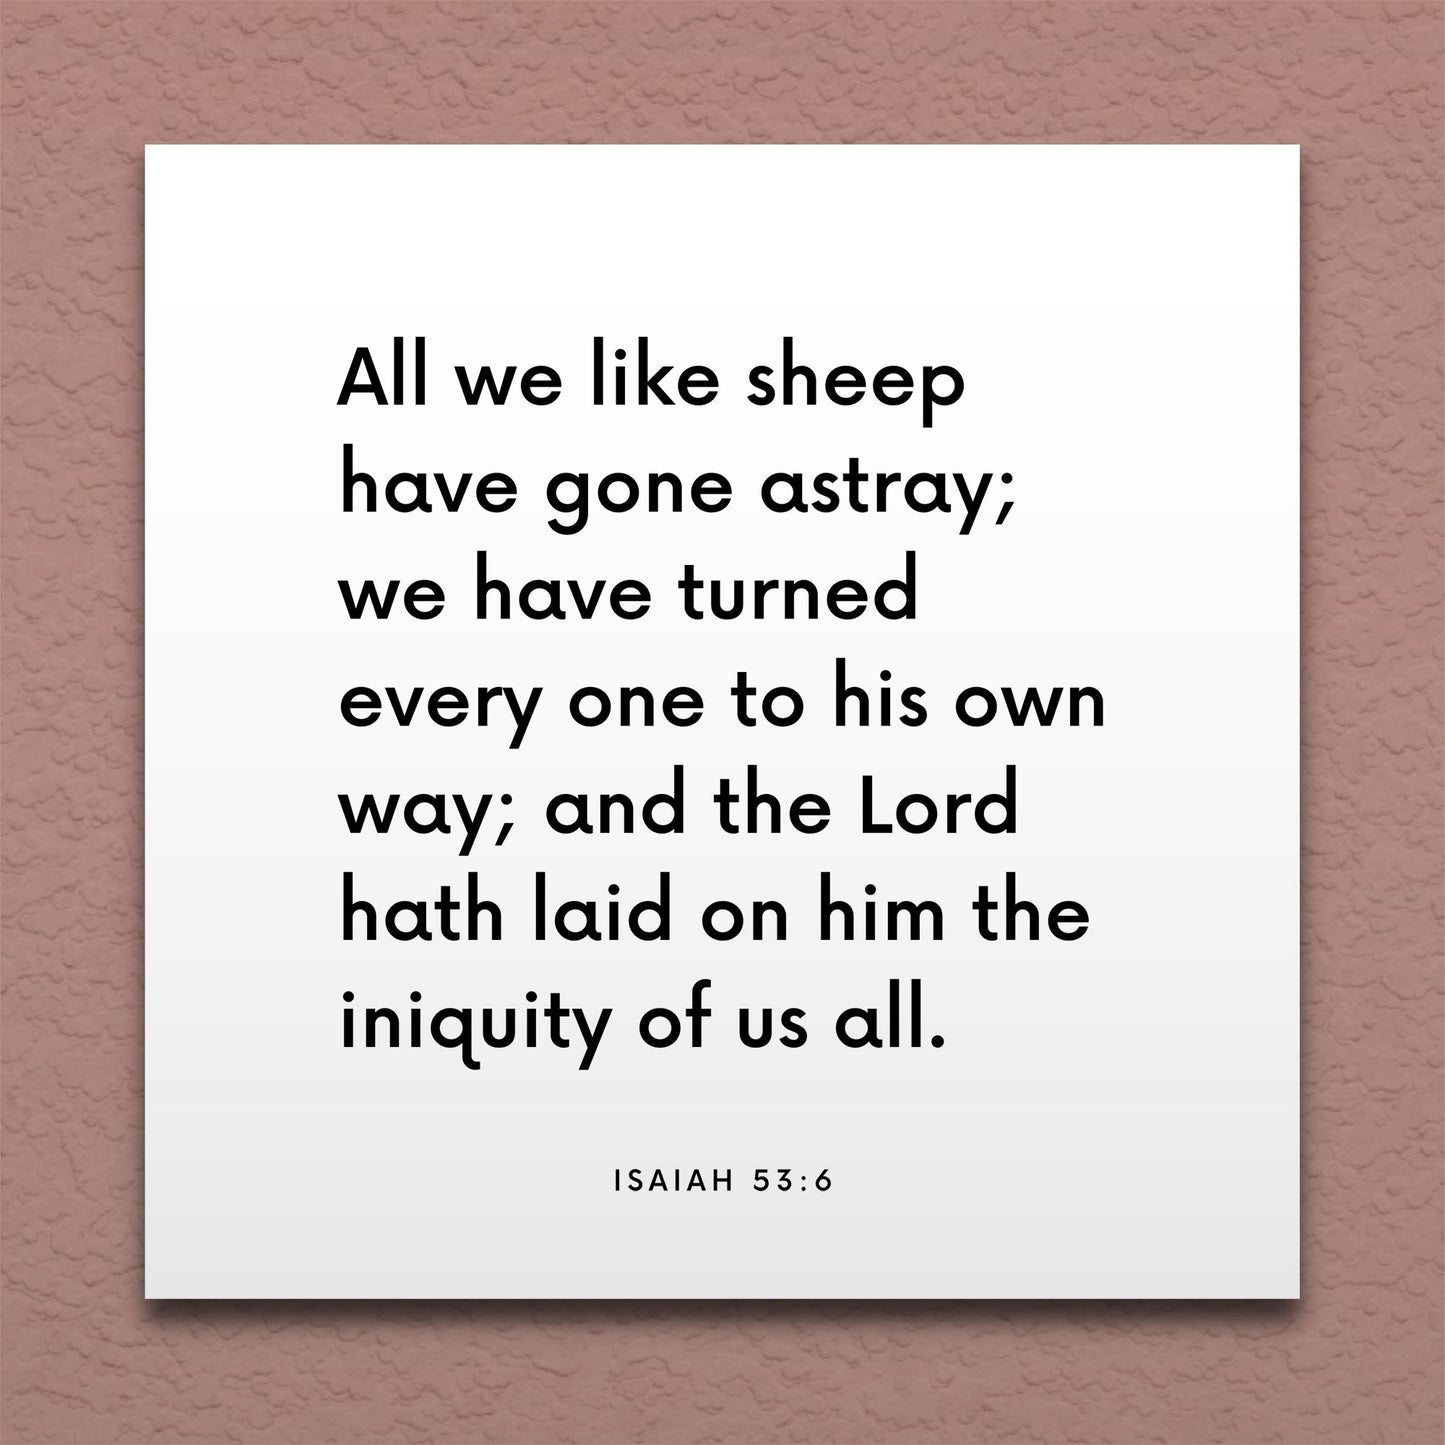 Wall-mounted scripture tile for Isaiah 53:6 - "All we like sheep have gone astray"